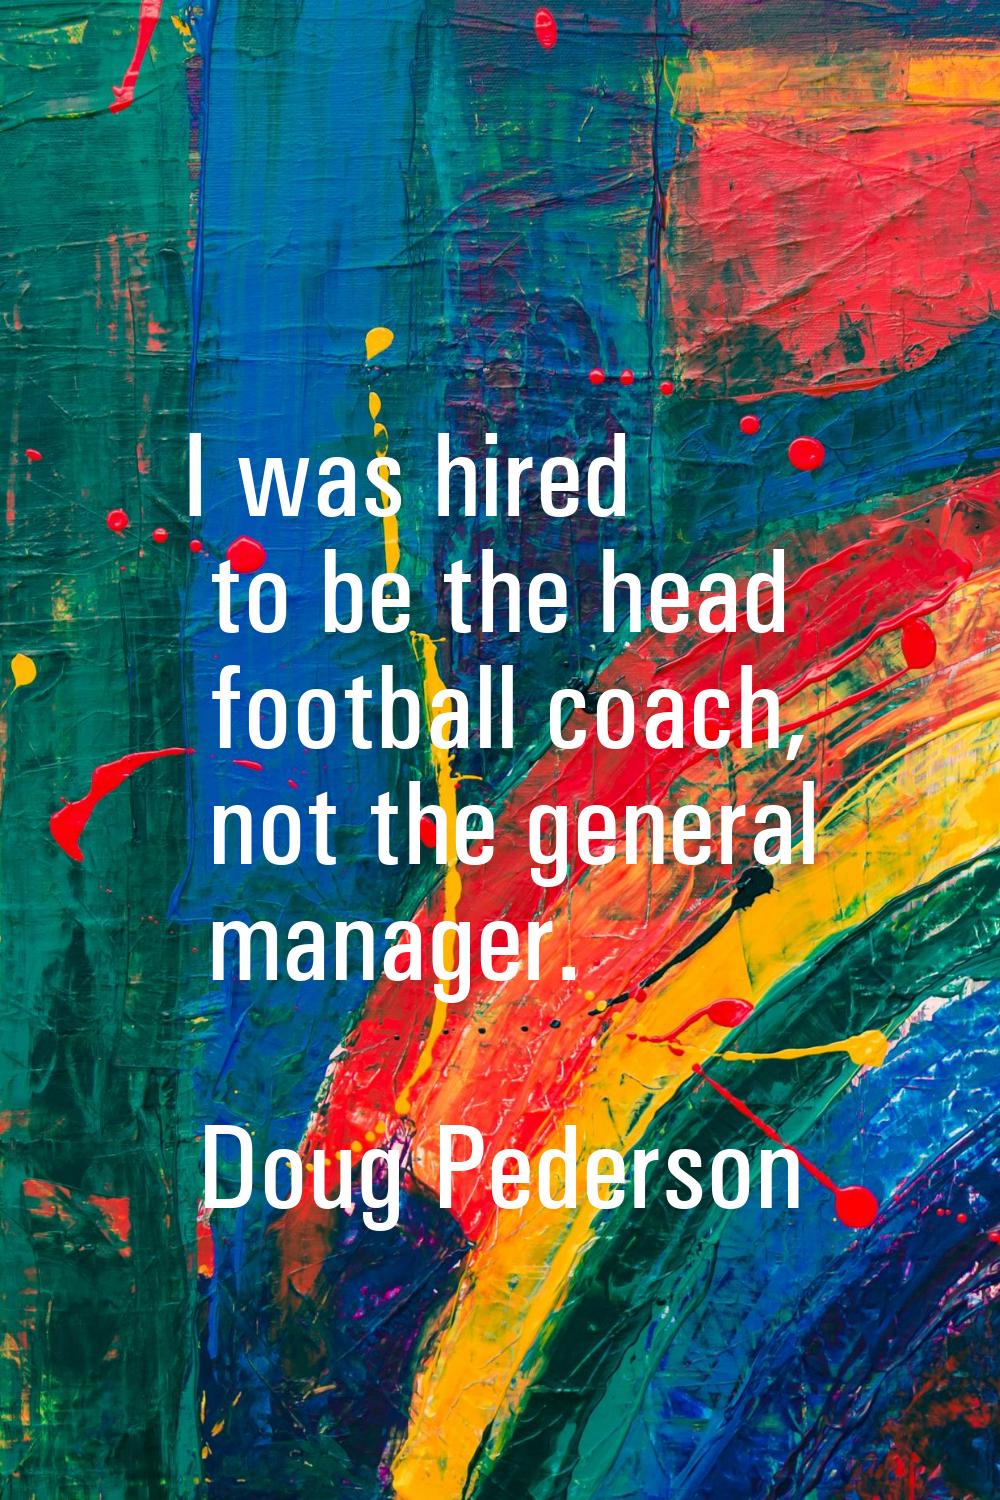 I was hired to be the head football coach, not the general manager.